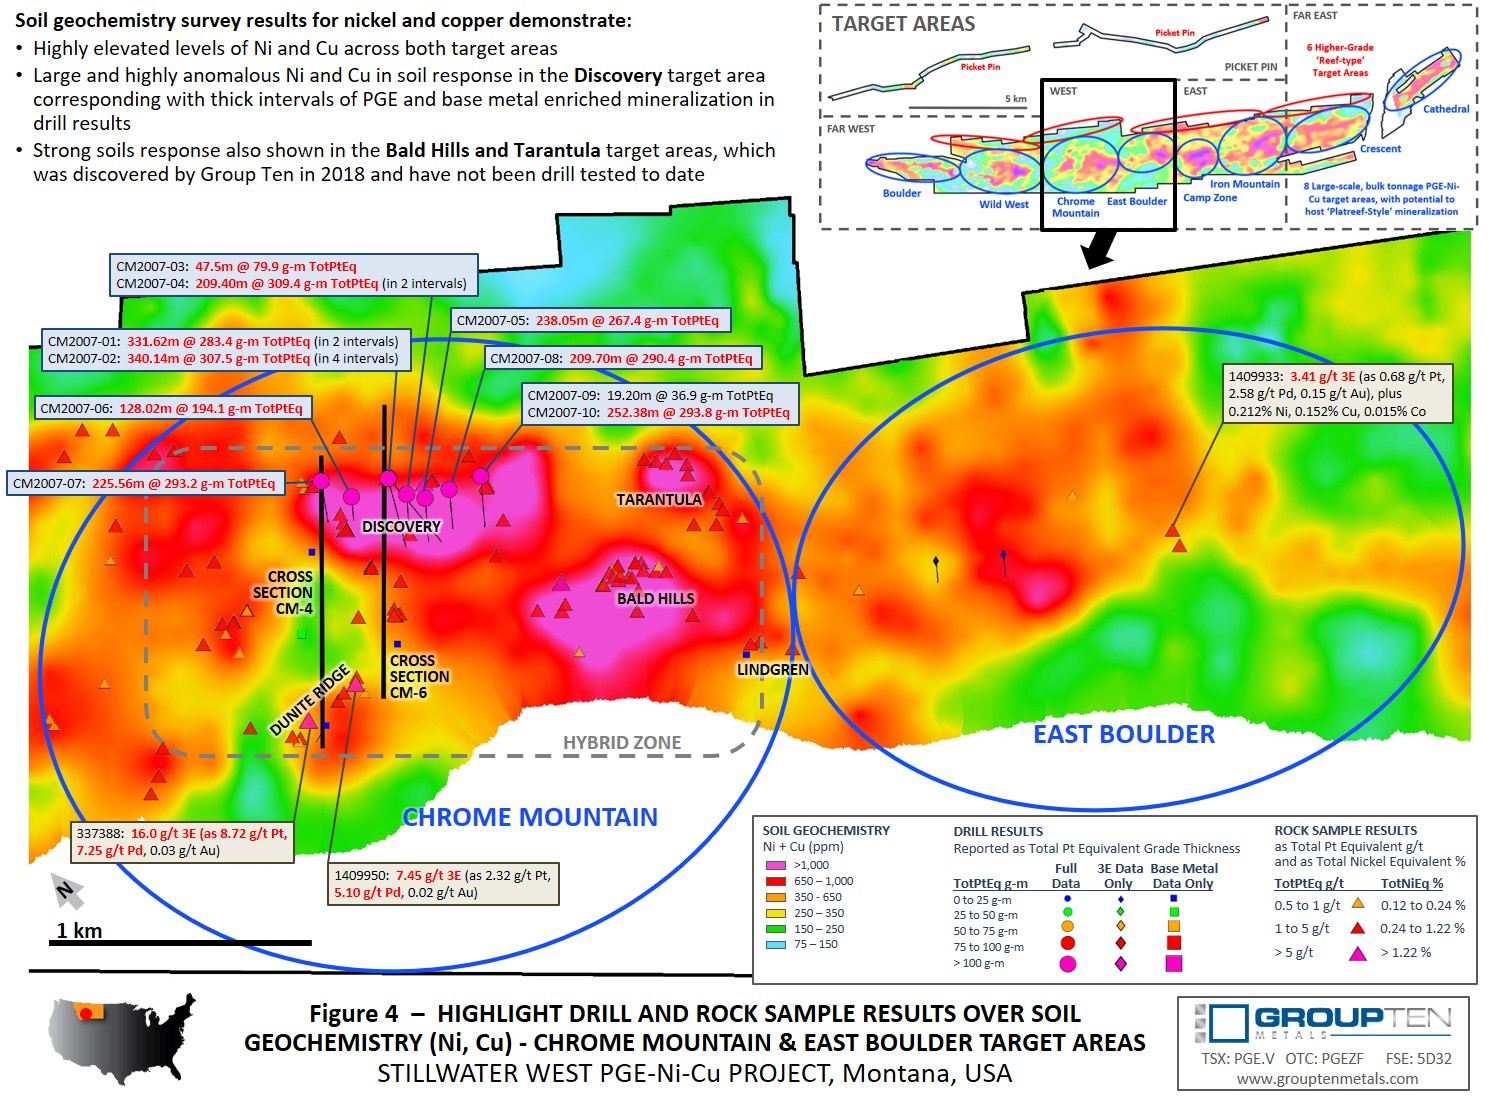 Figure 4  –  Highlight Drill and Rock Sample Results Over Soil Geochemistry (Ni, Cu) - Chrome Mountain & East Boulder Target Areas